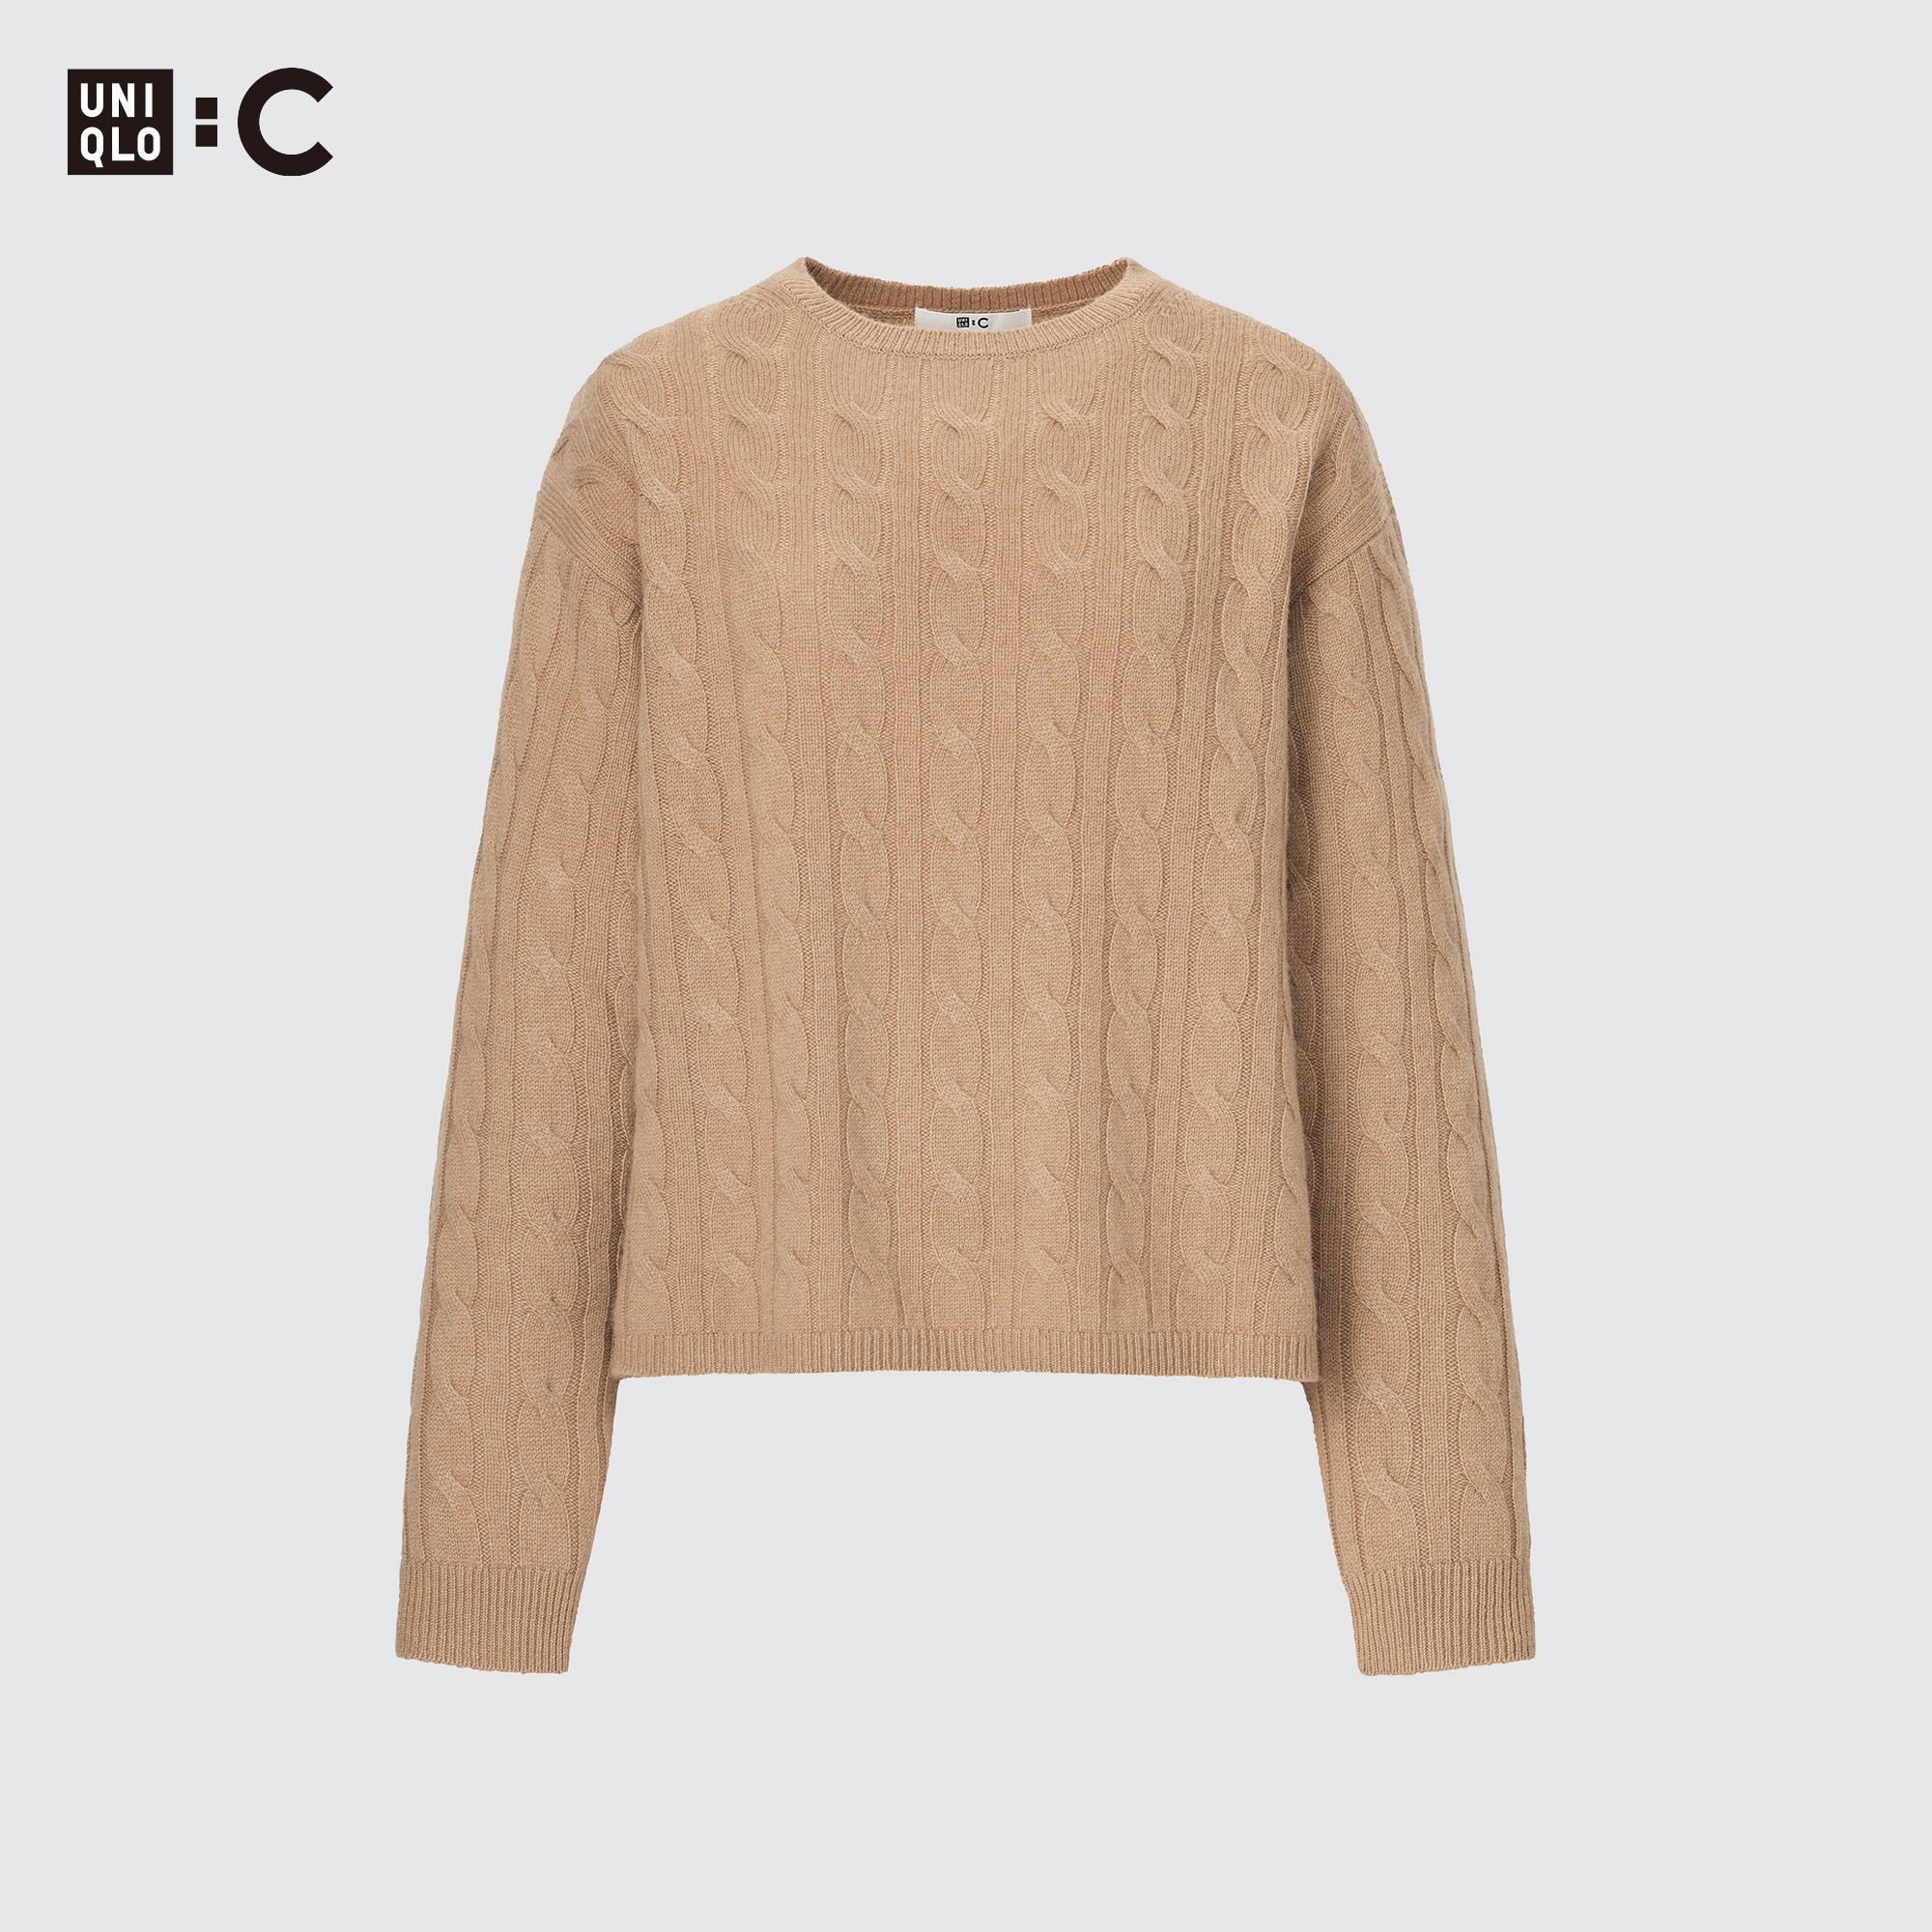 WOMEN'S UNIQLO : C 100% CASHMERE CABLE LONG SLEEVE SHORT SWEATER 